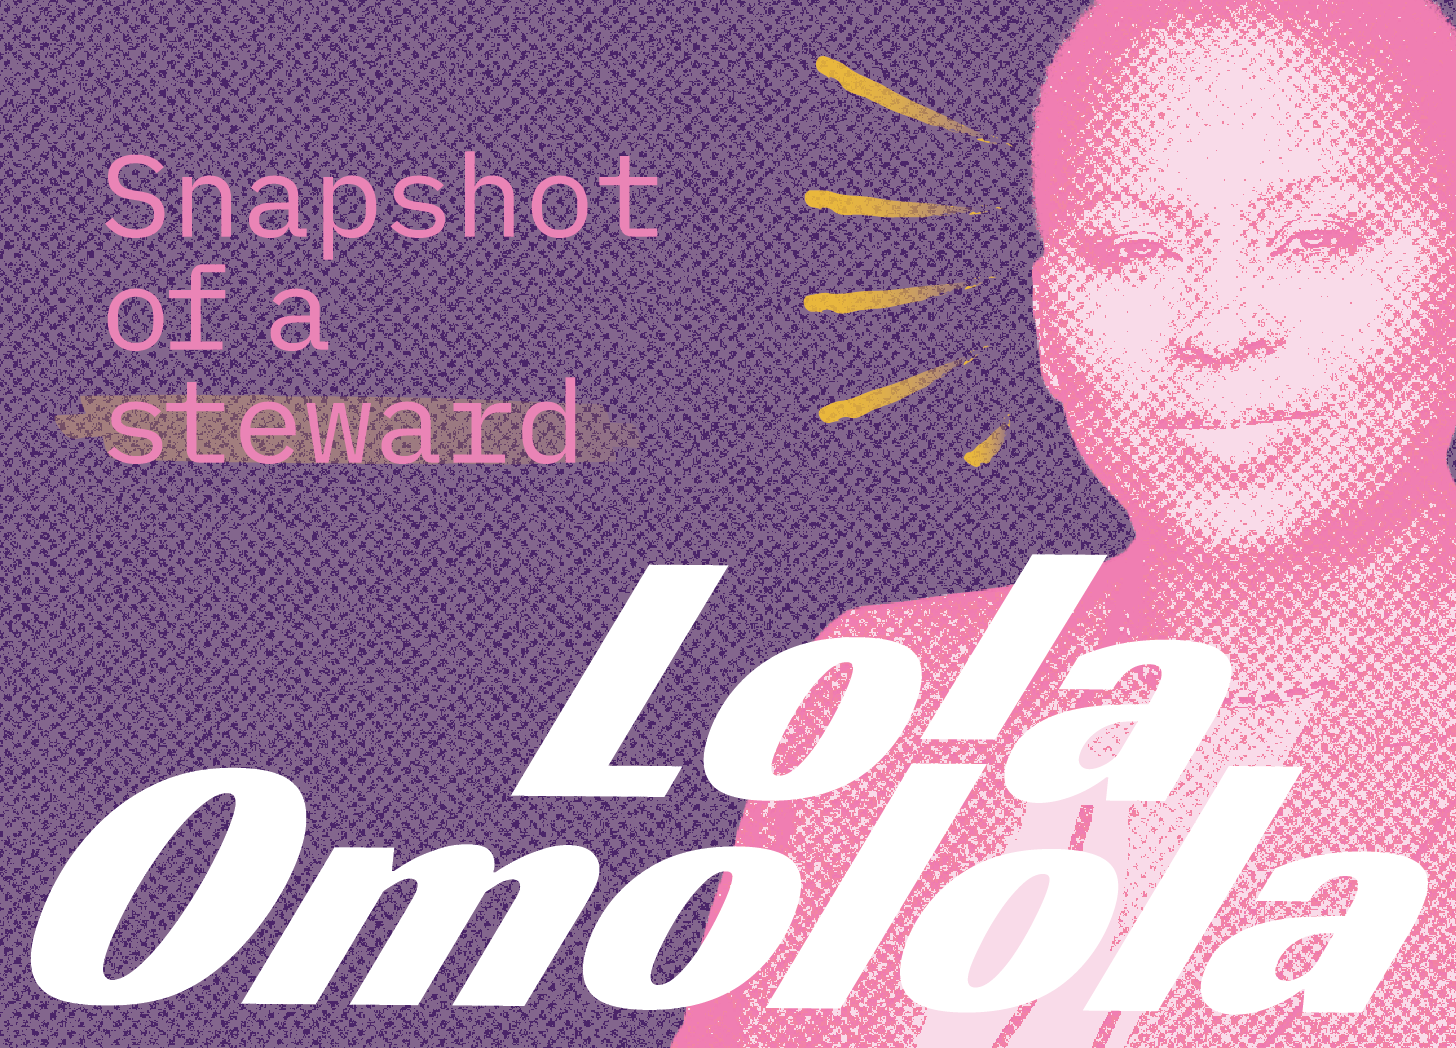 A styled photo illustration design with the text "Snapshot of a steward" and "Lola Omolola"